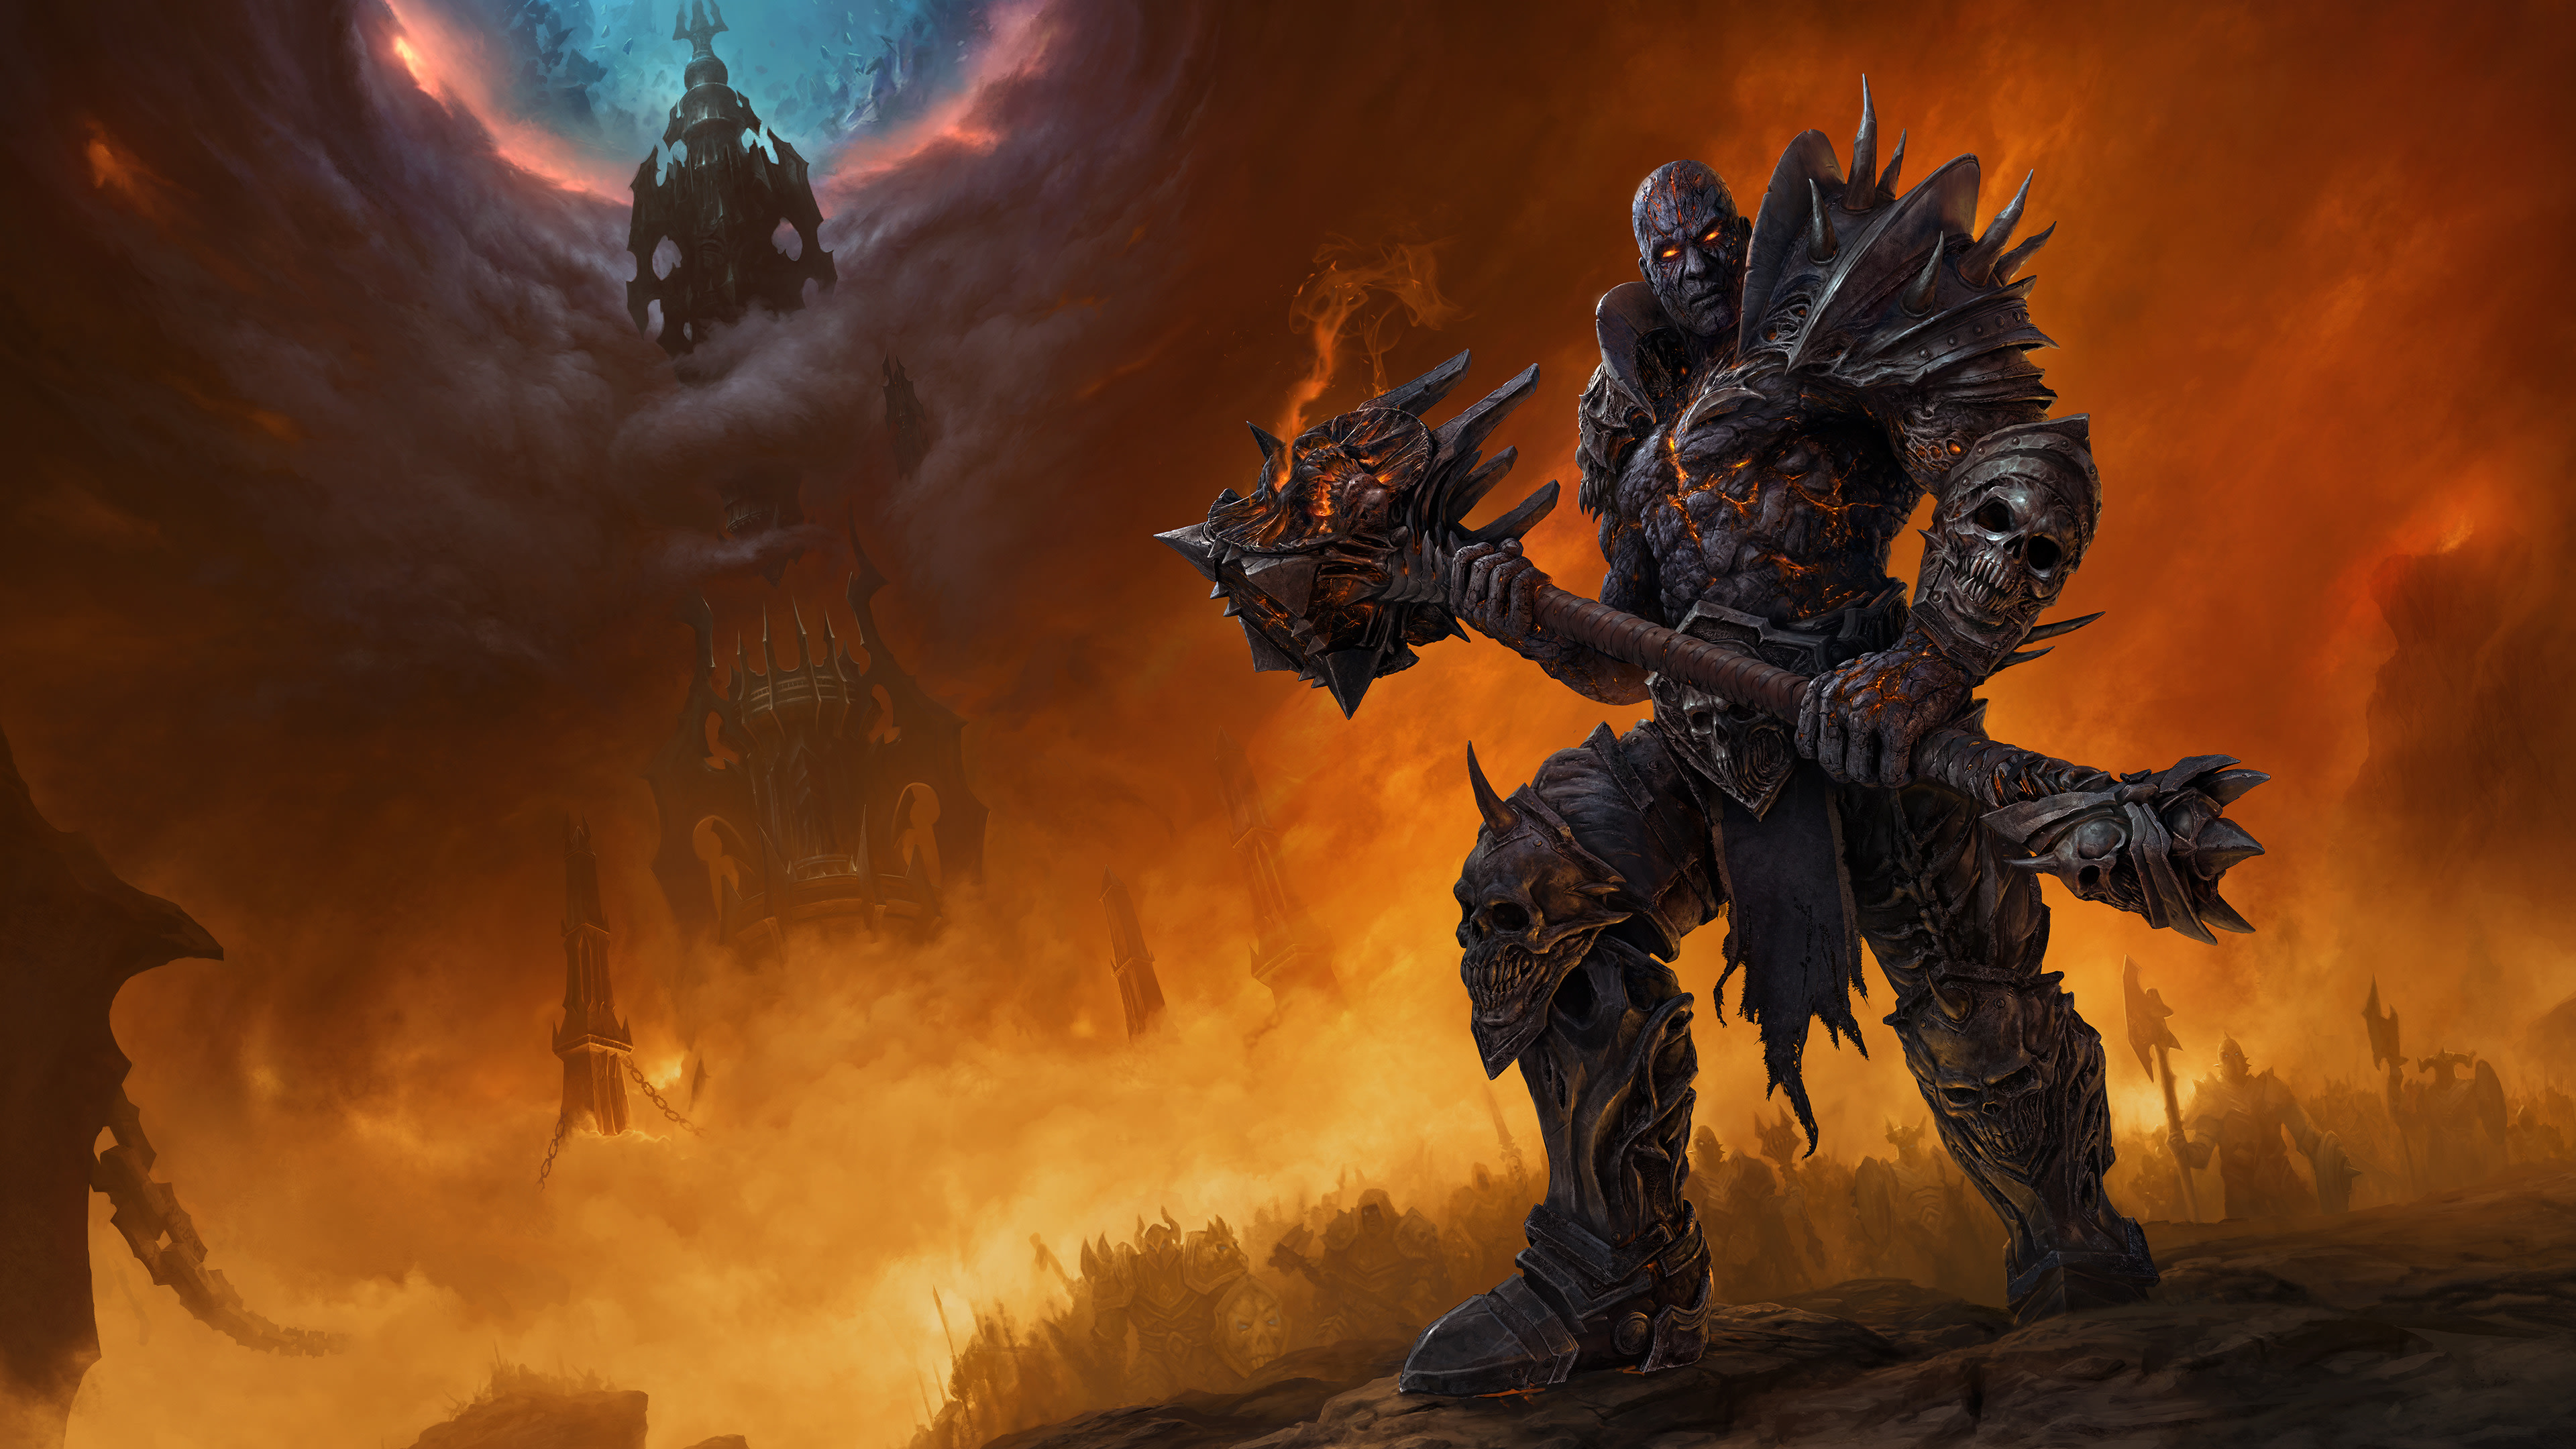 World Of Warcraft Shadowlands Wallpapers